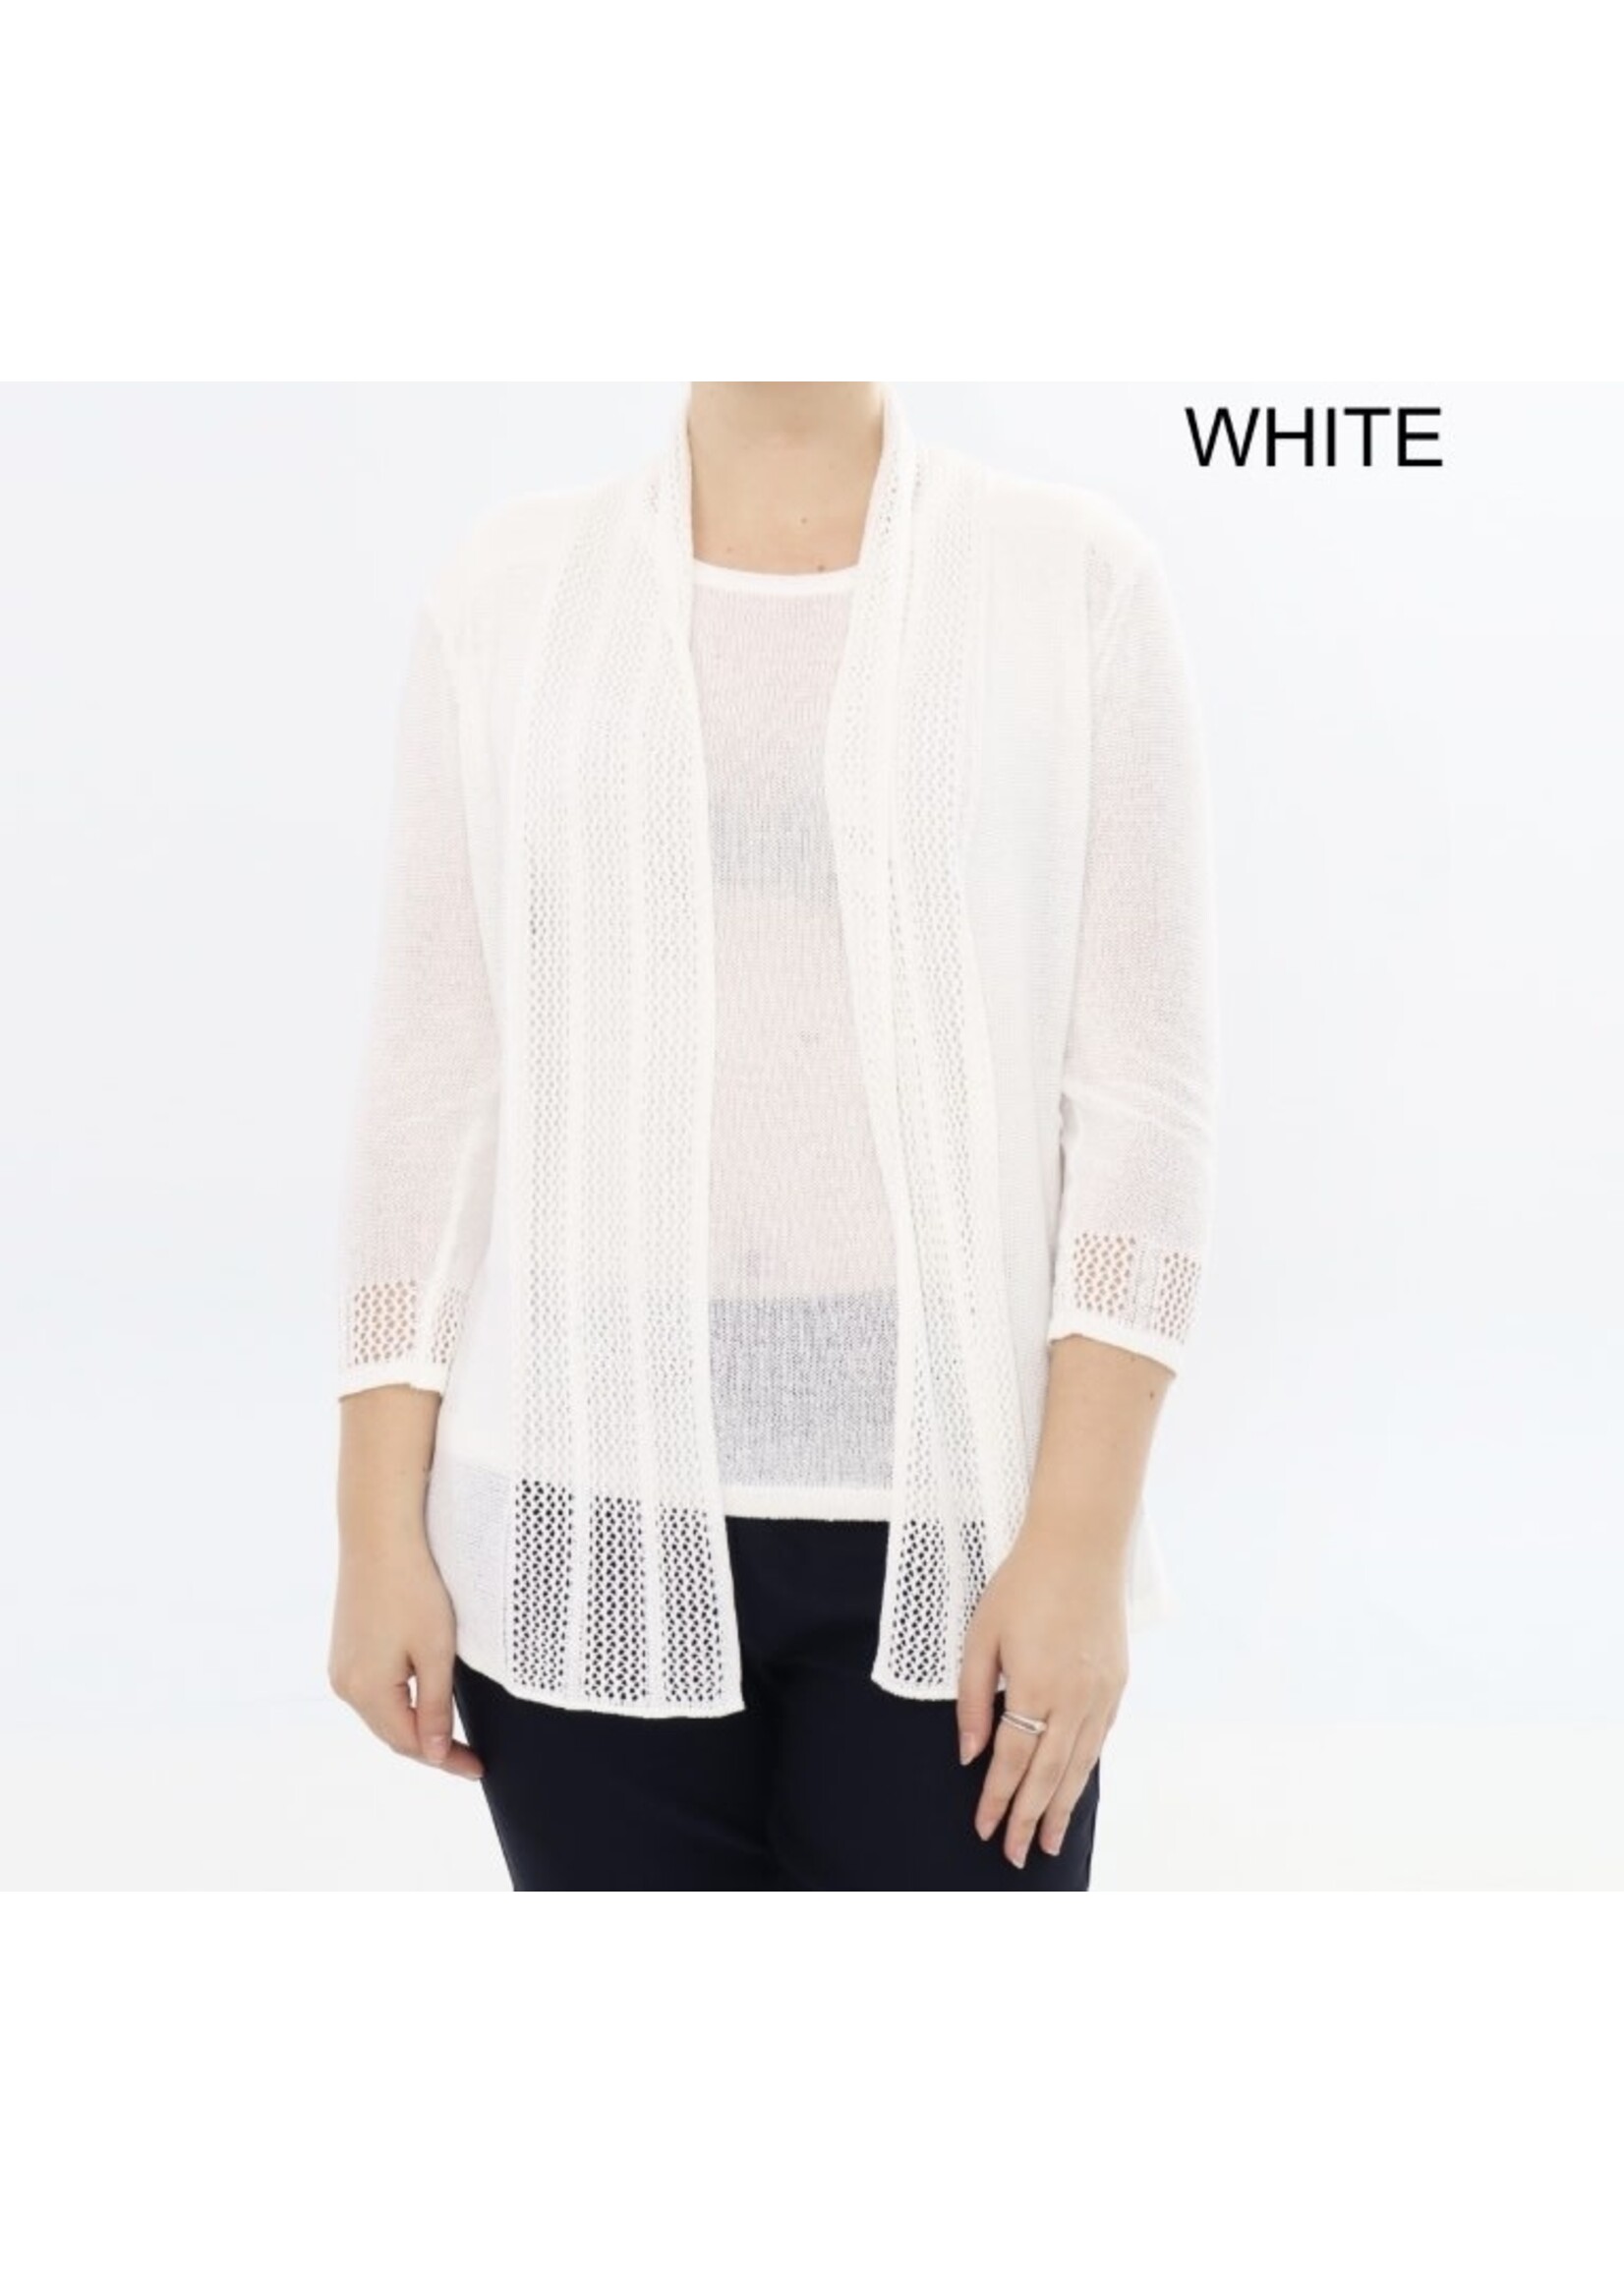 Moffi MOFFI CARDIGAN WITH CRISS CROSS BACK PURE WHITE Sm